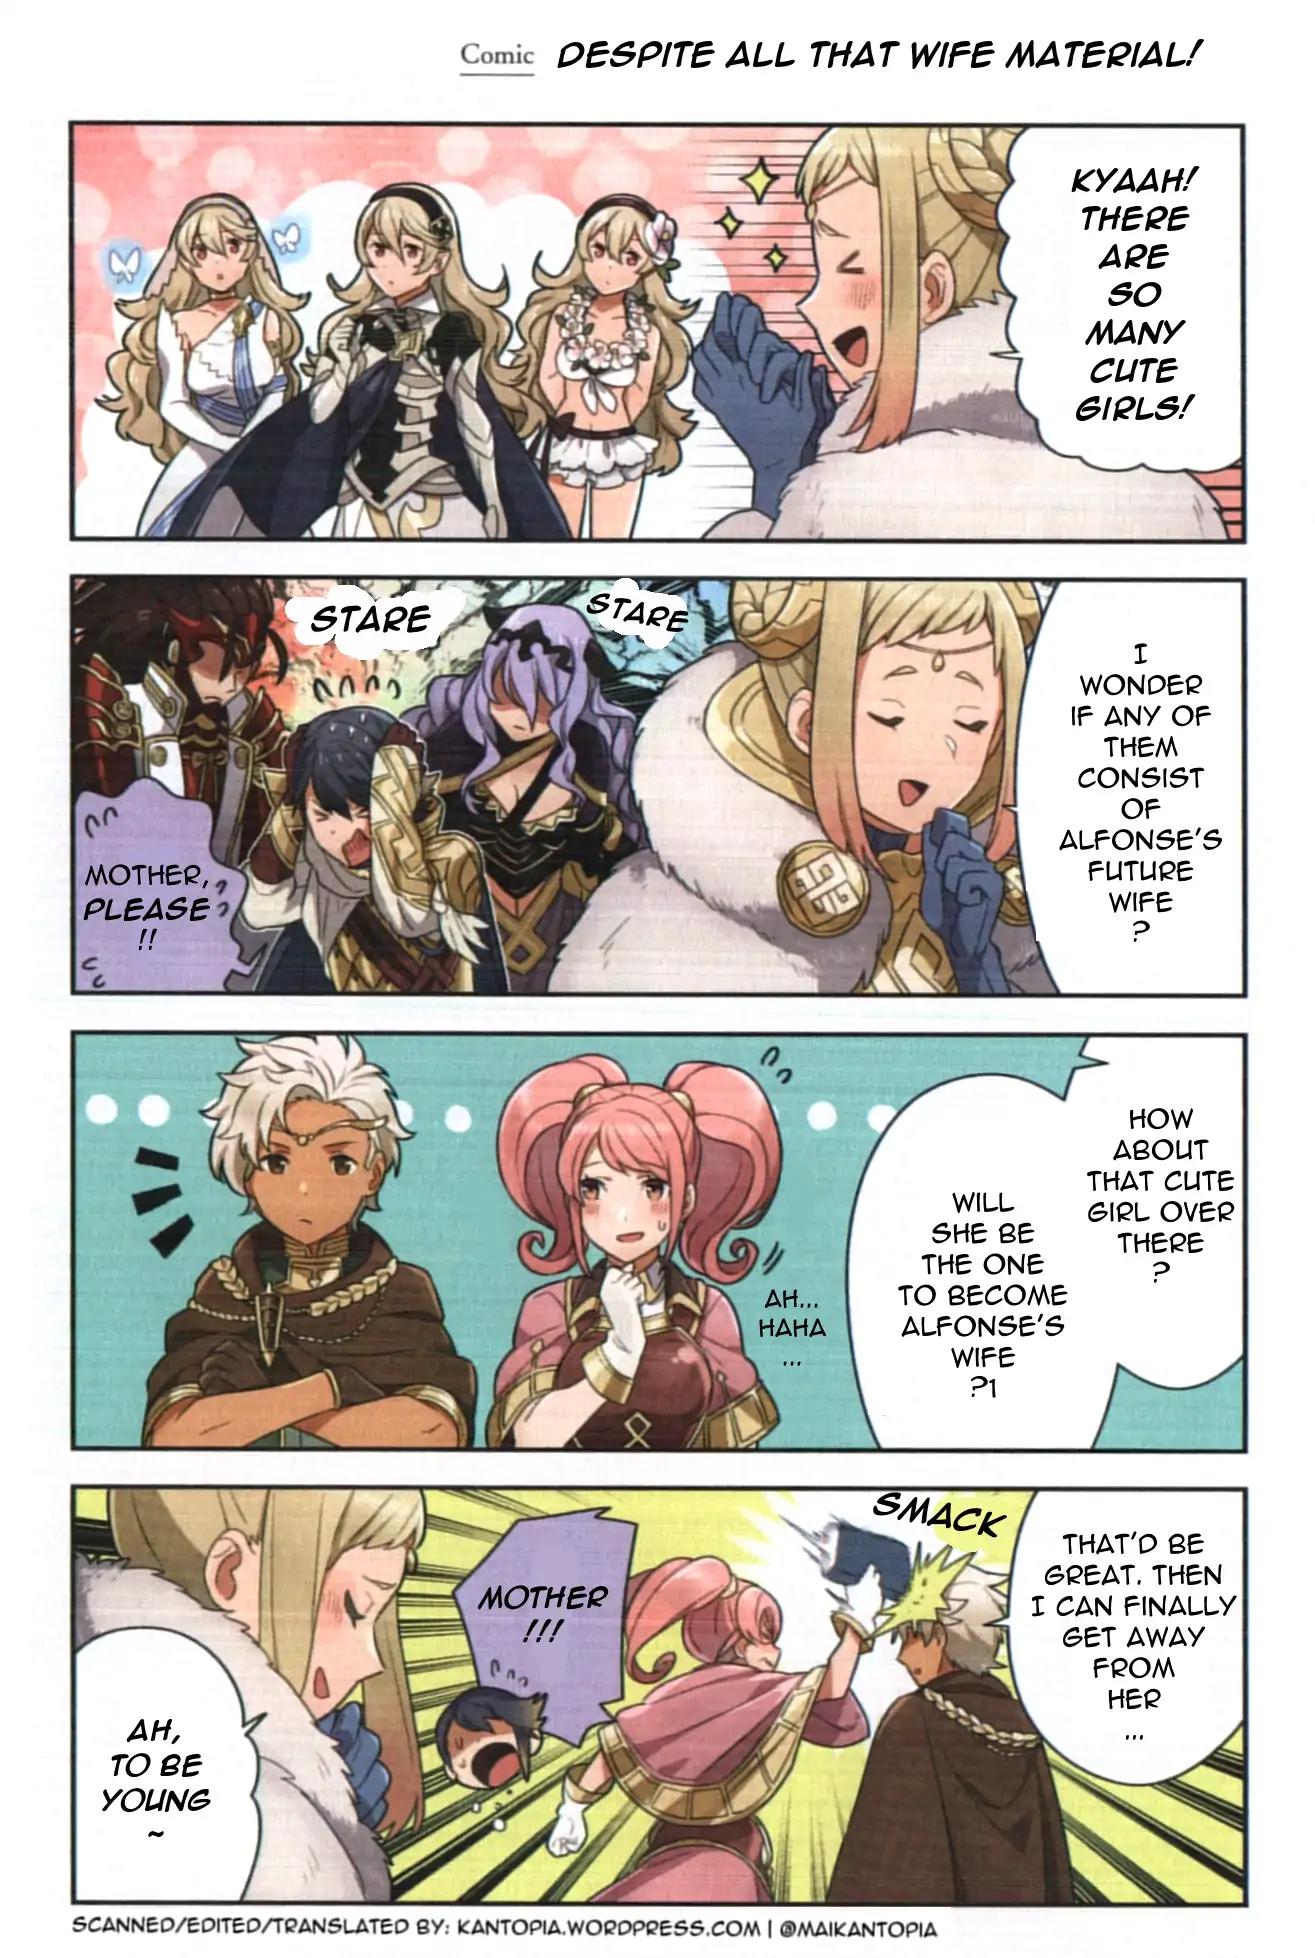 Fire Emblem Heroes Daily Lives of the Heroes Vol.1 Chapter 0.22: Character comic: